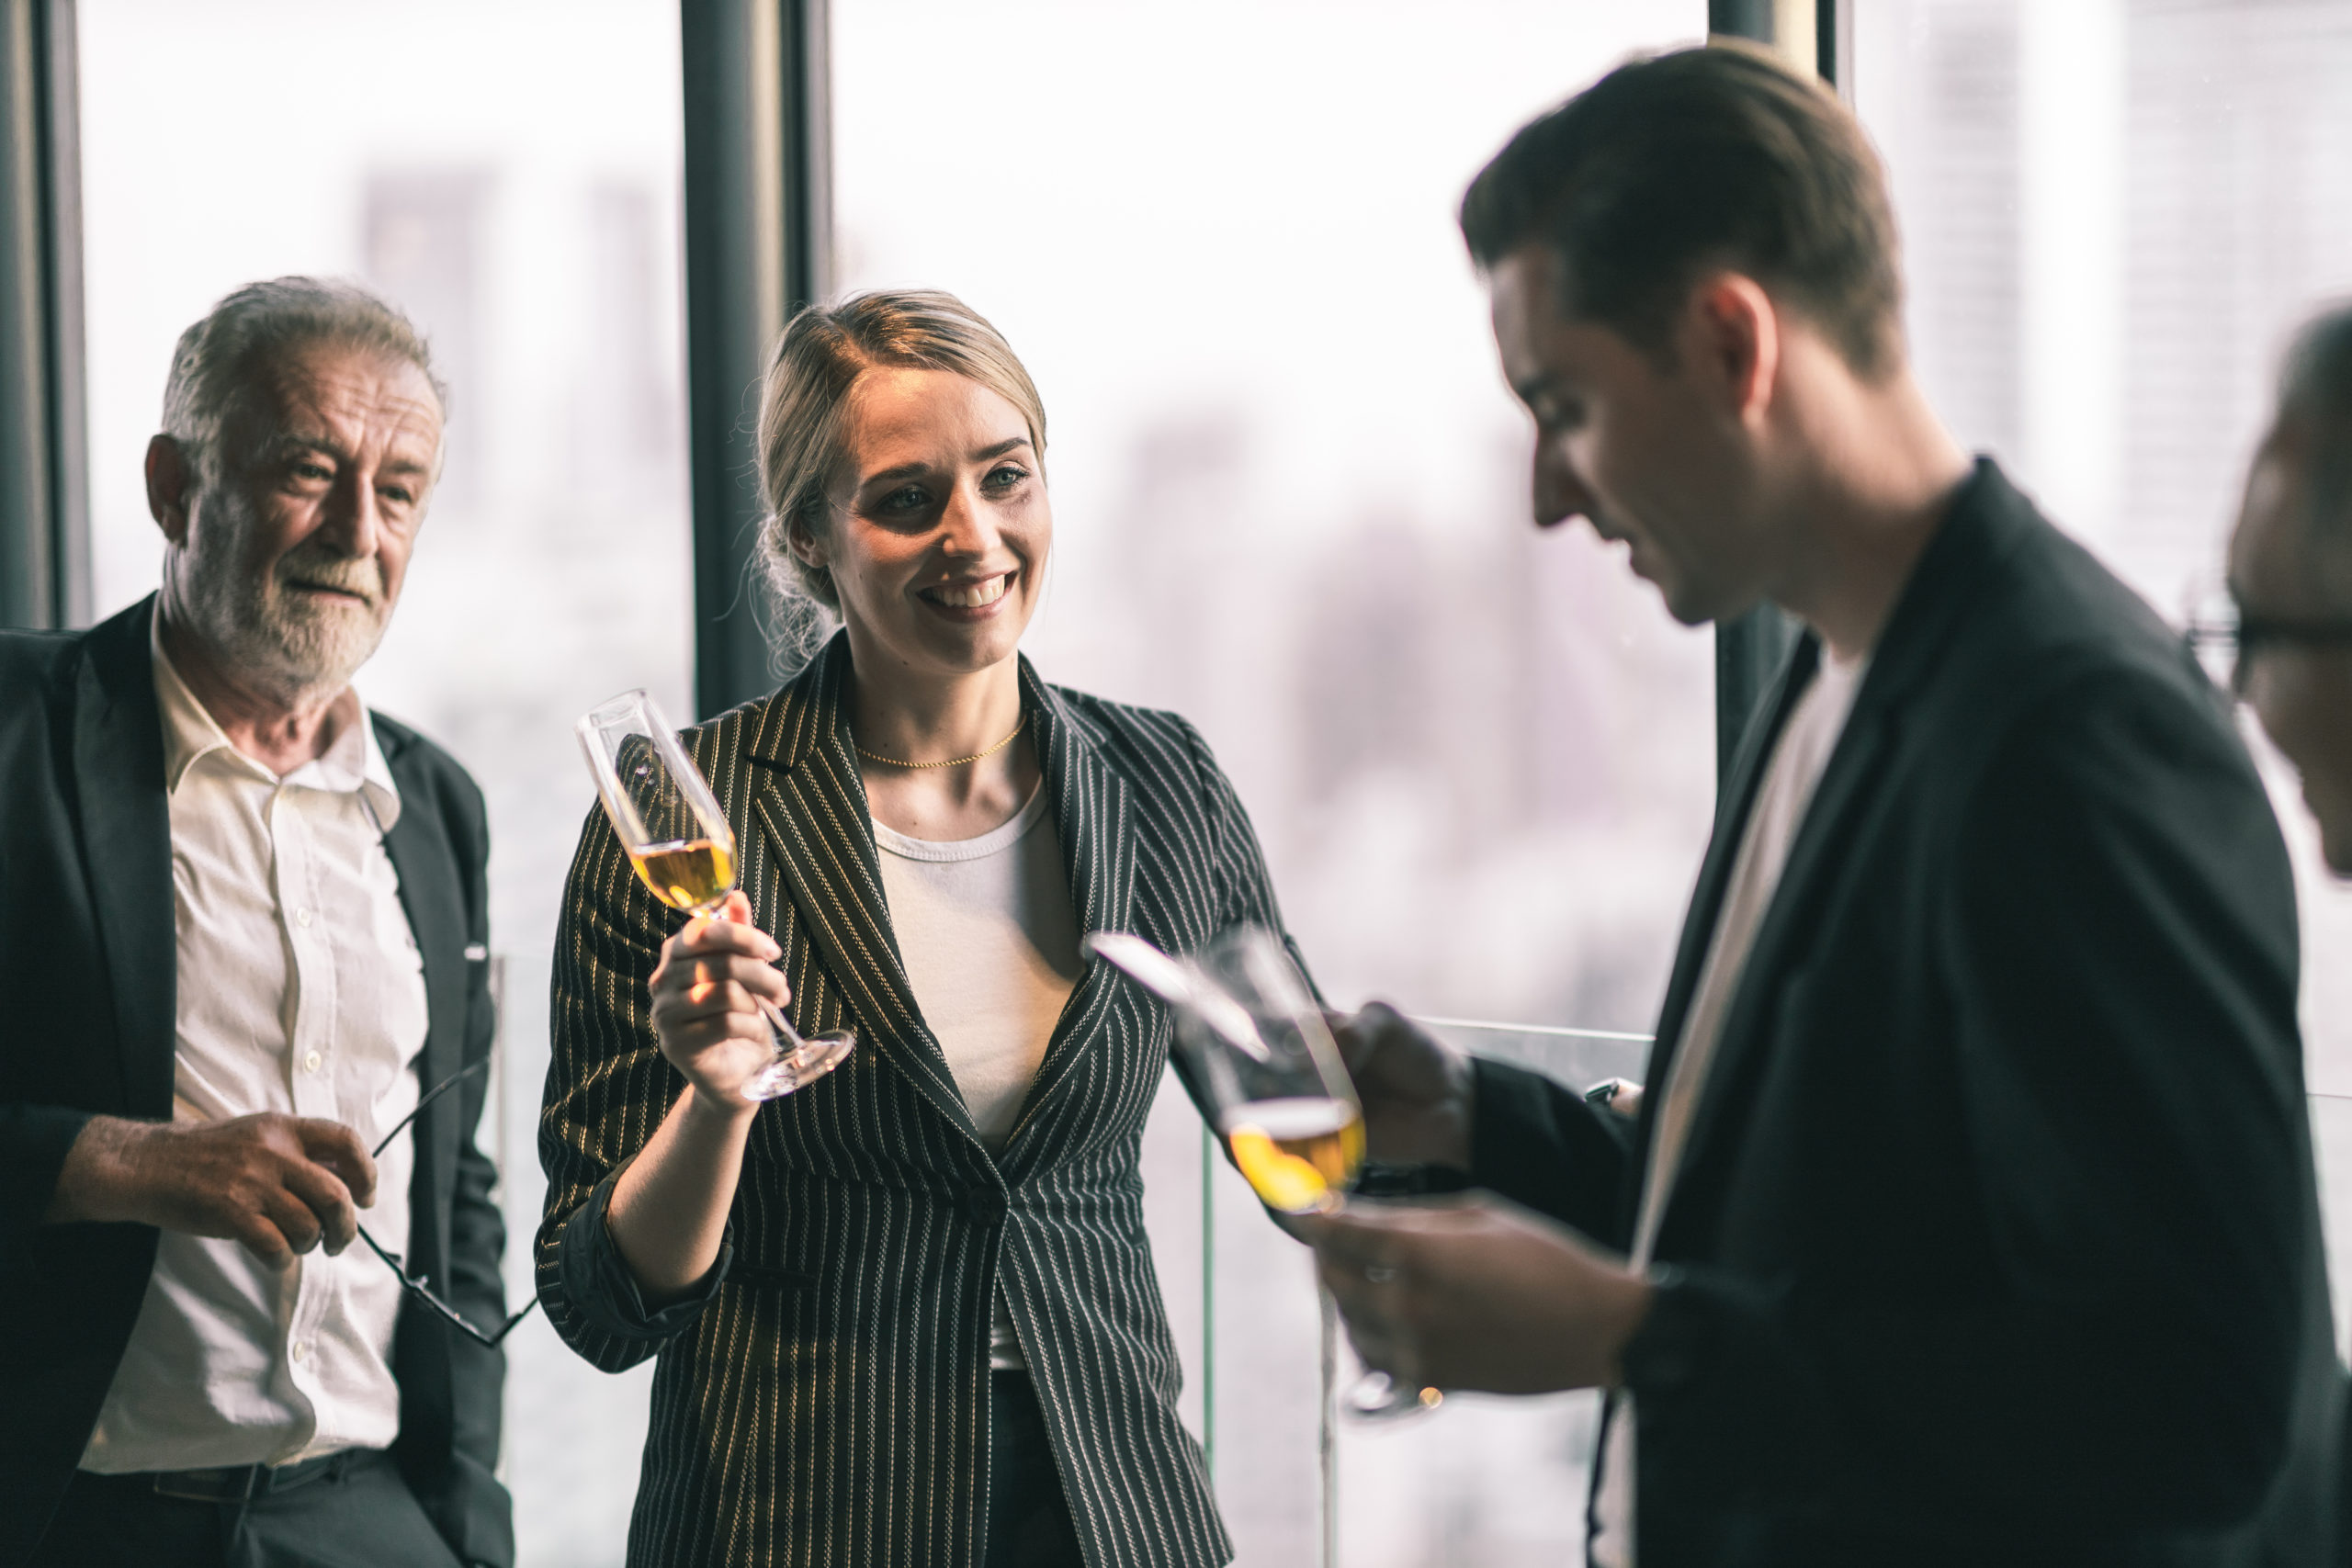 Our Corporate Drinking Culture: Where the Boardroom and Social Meet